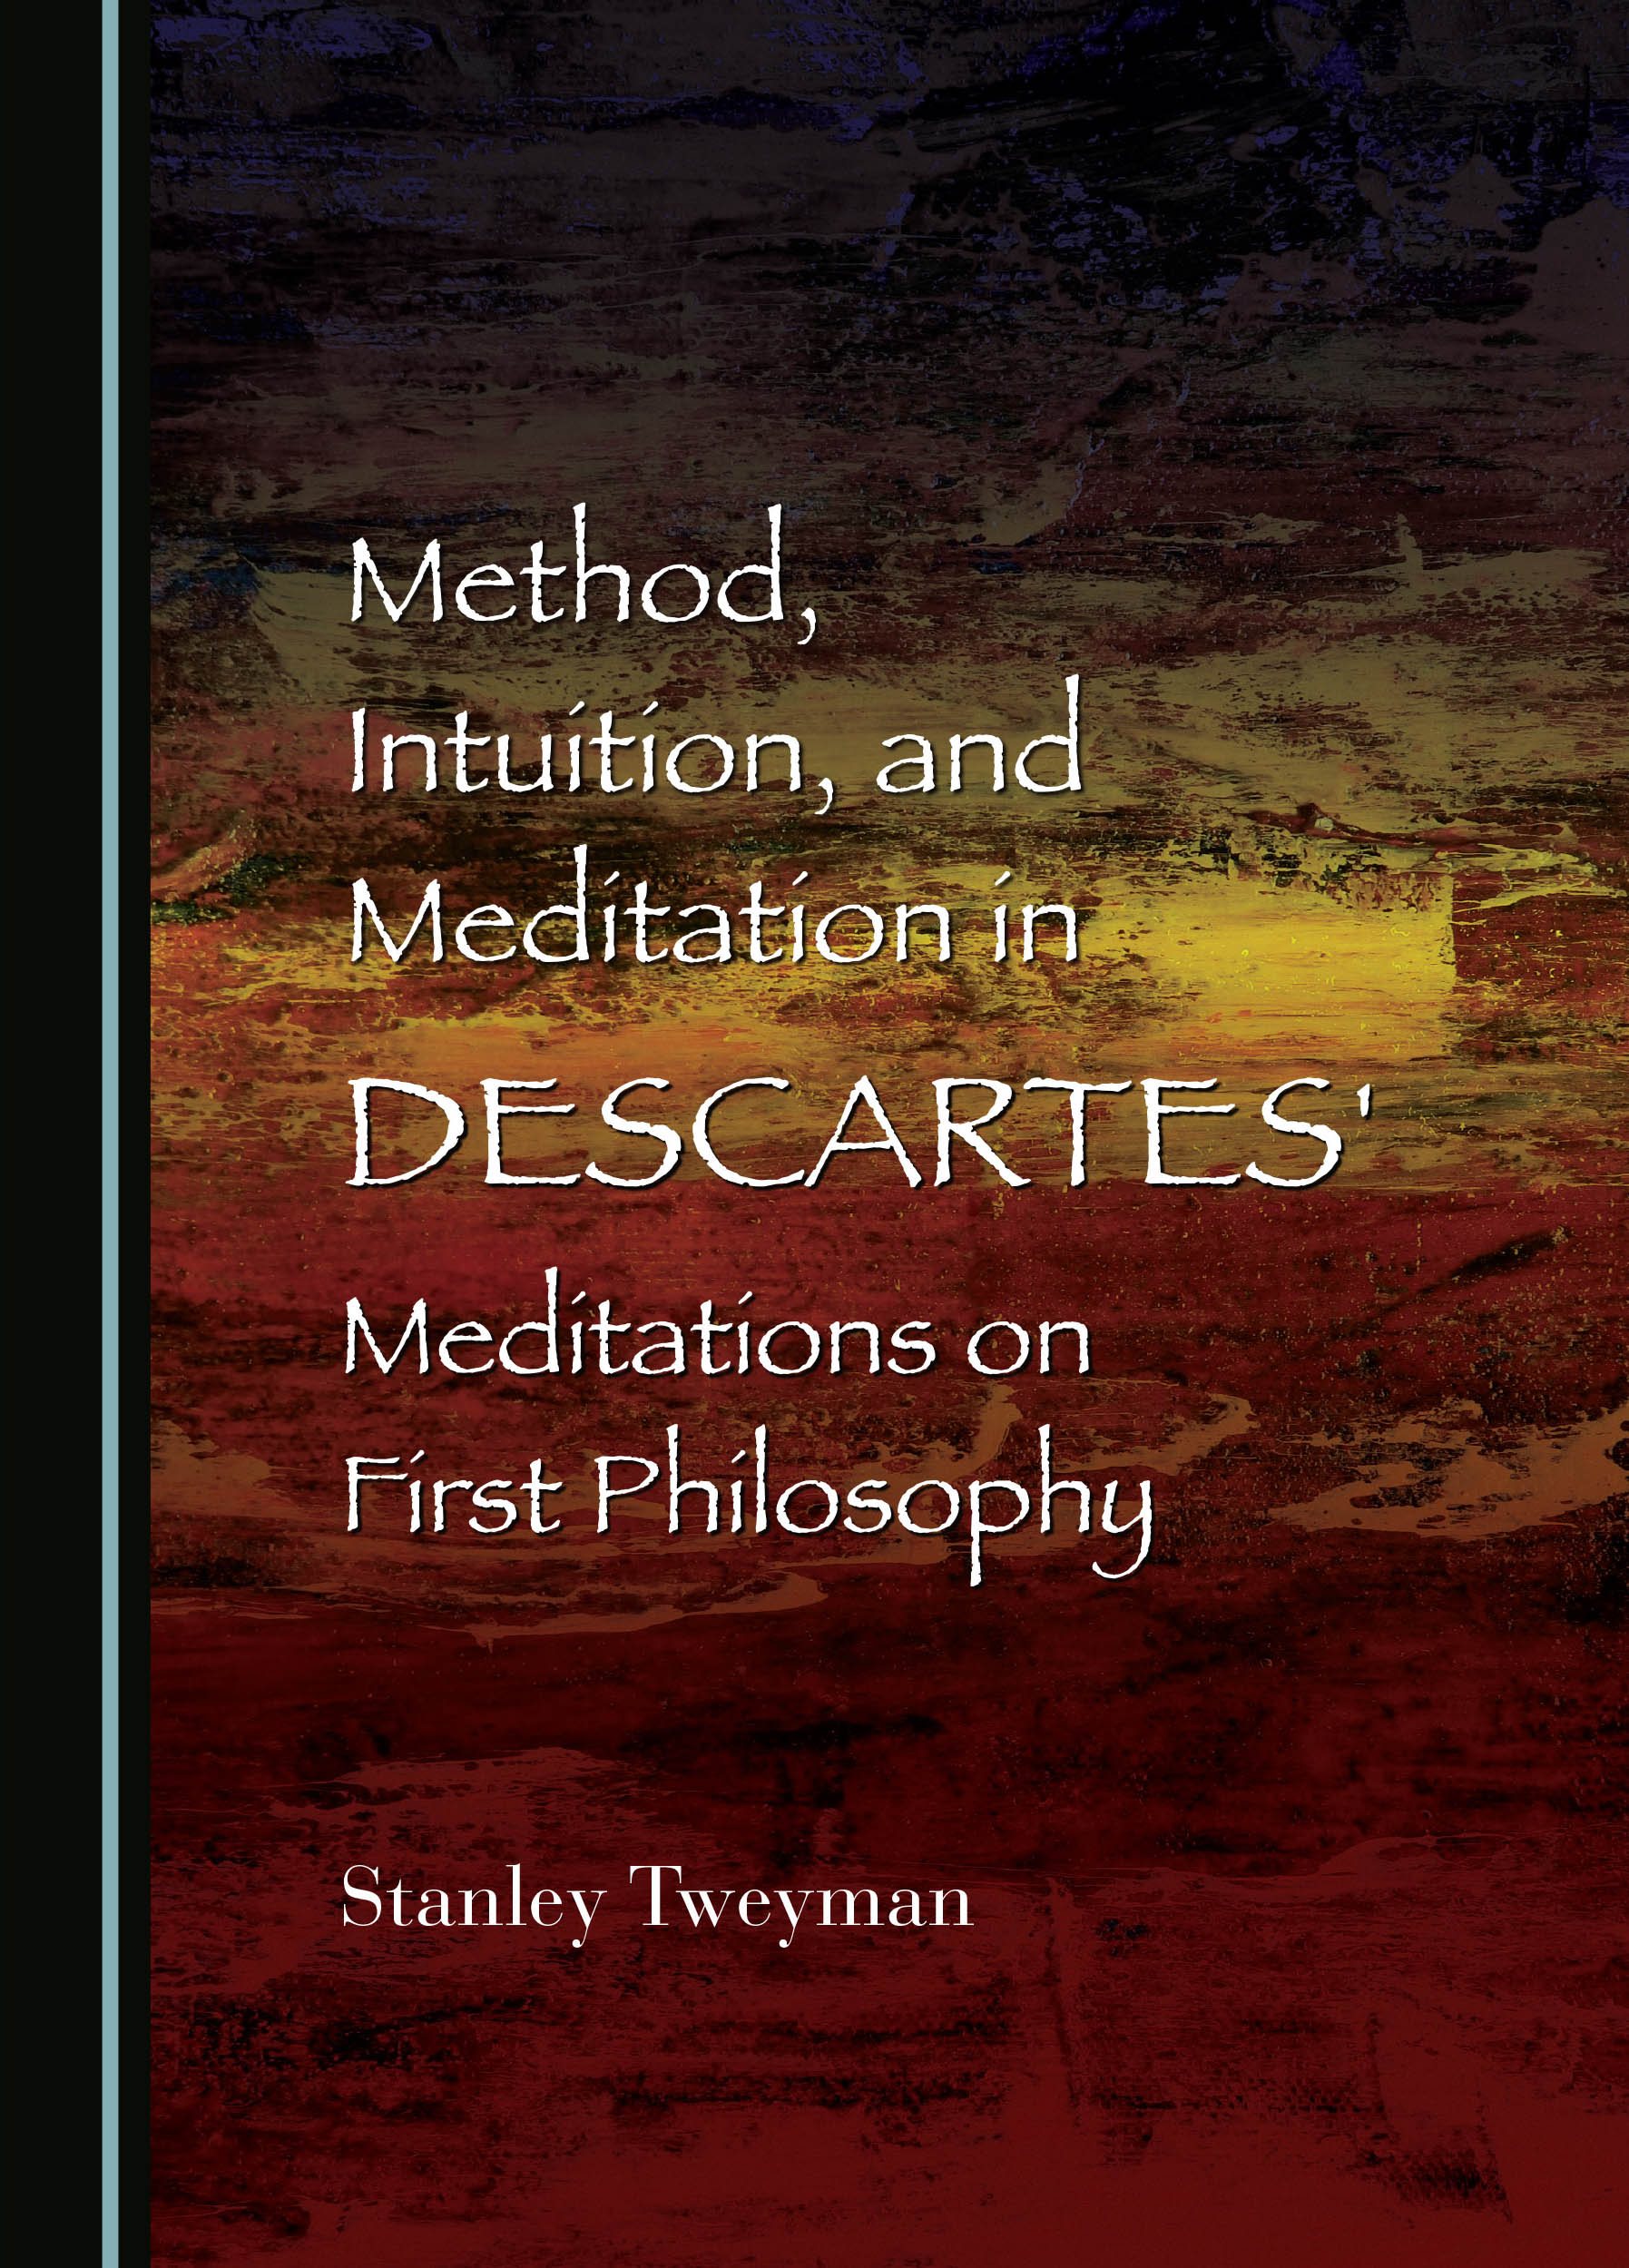 Method, Intuition, and Meditation in Descartes' Meditations on First Philosophy